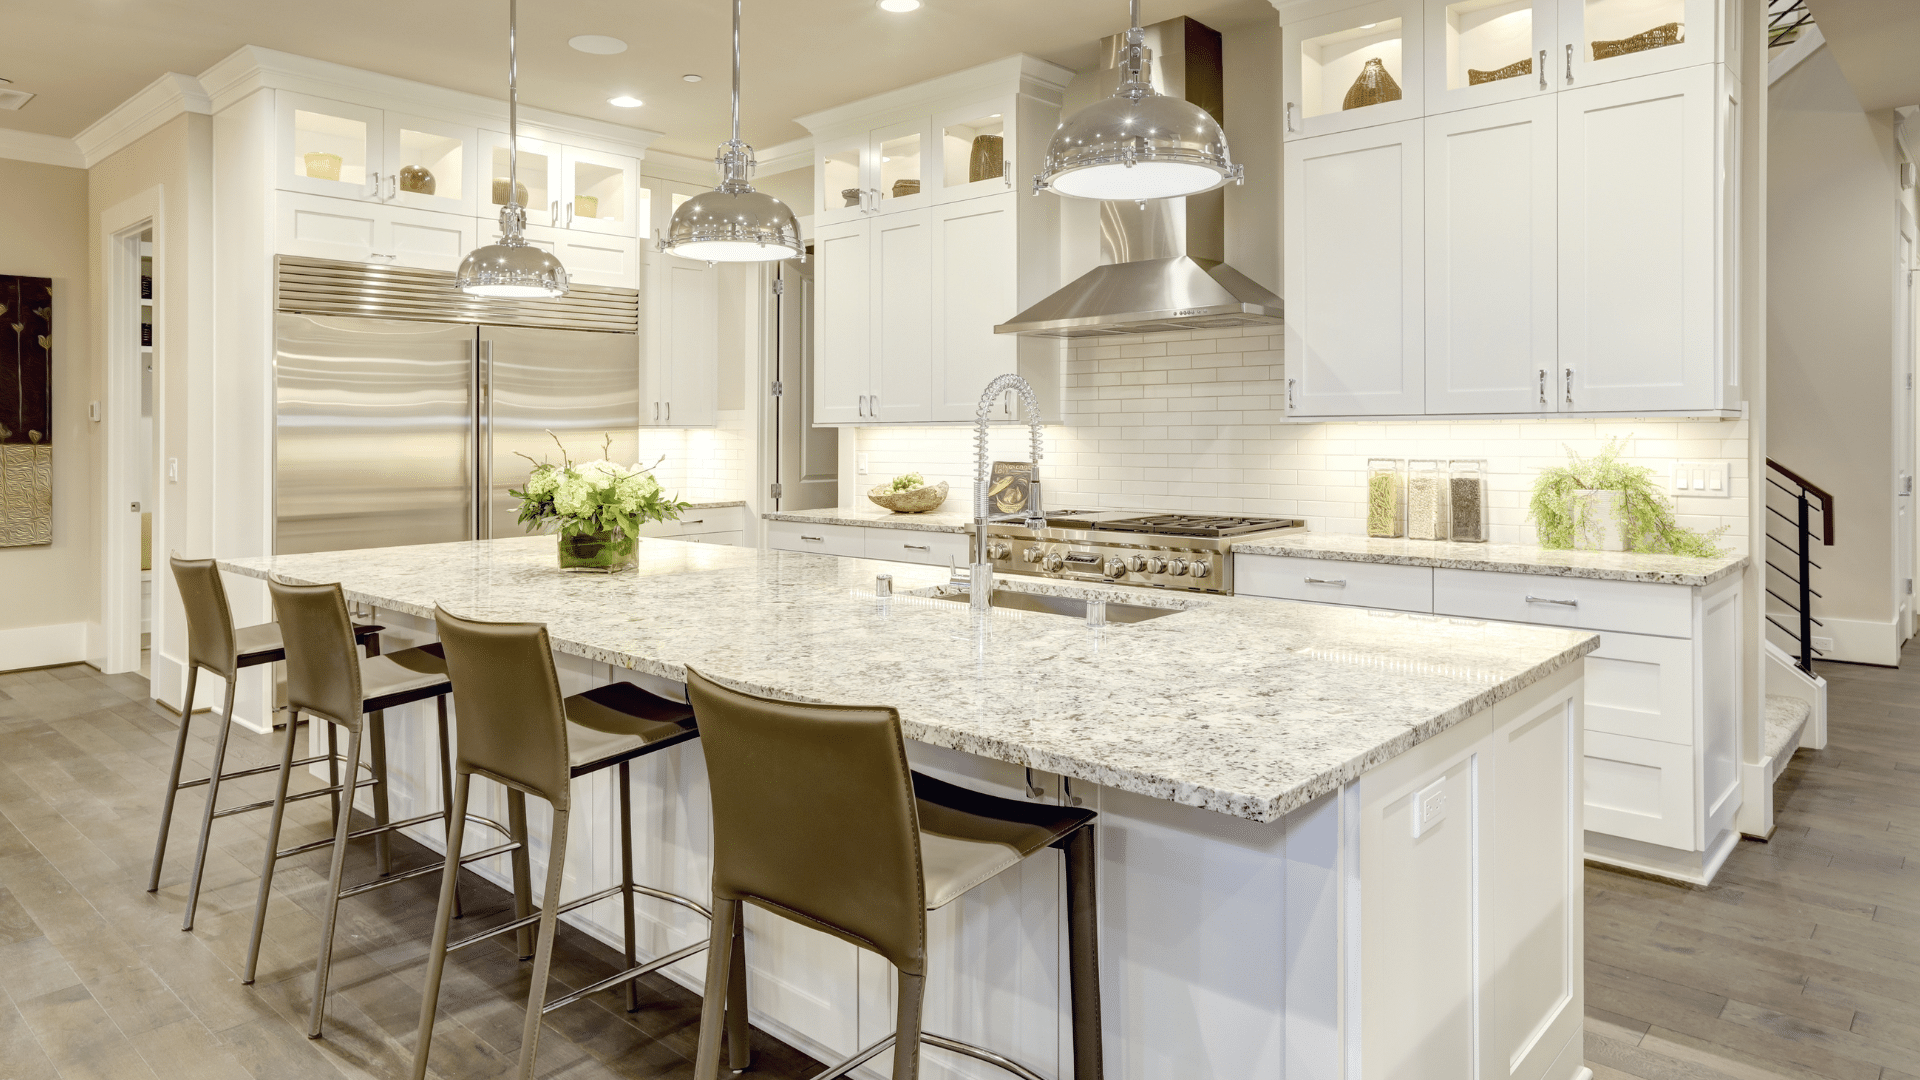 Luxury kitchen with white shaker cabinets and granite countertop